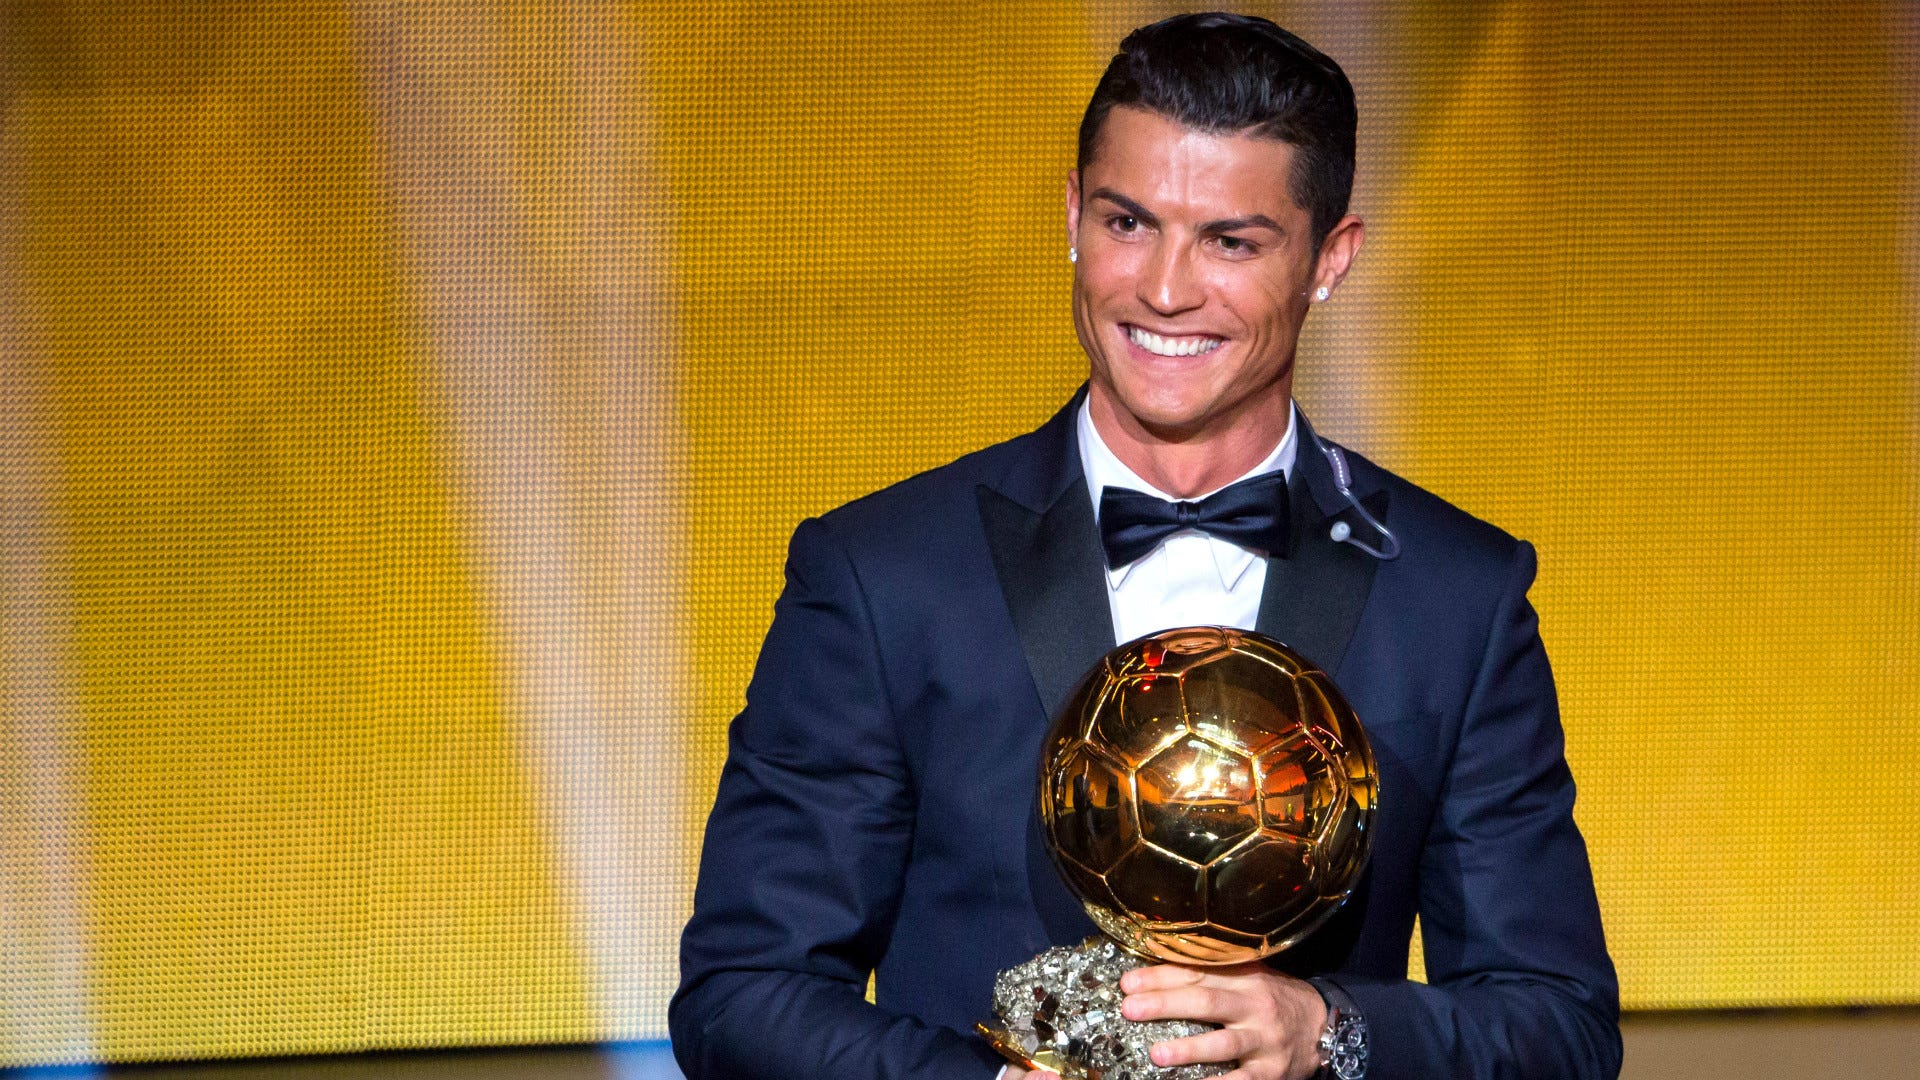 Ballon d'Or: When will this year's winner be revealed? | Goal.com